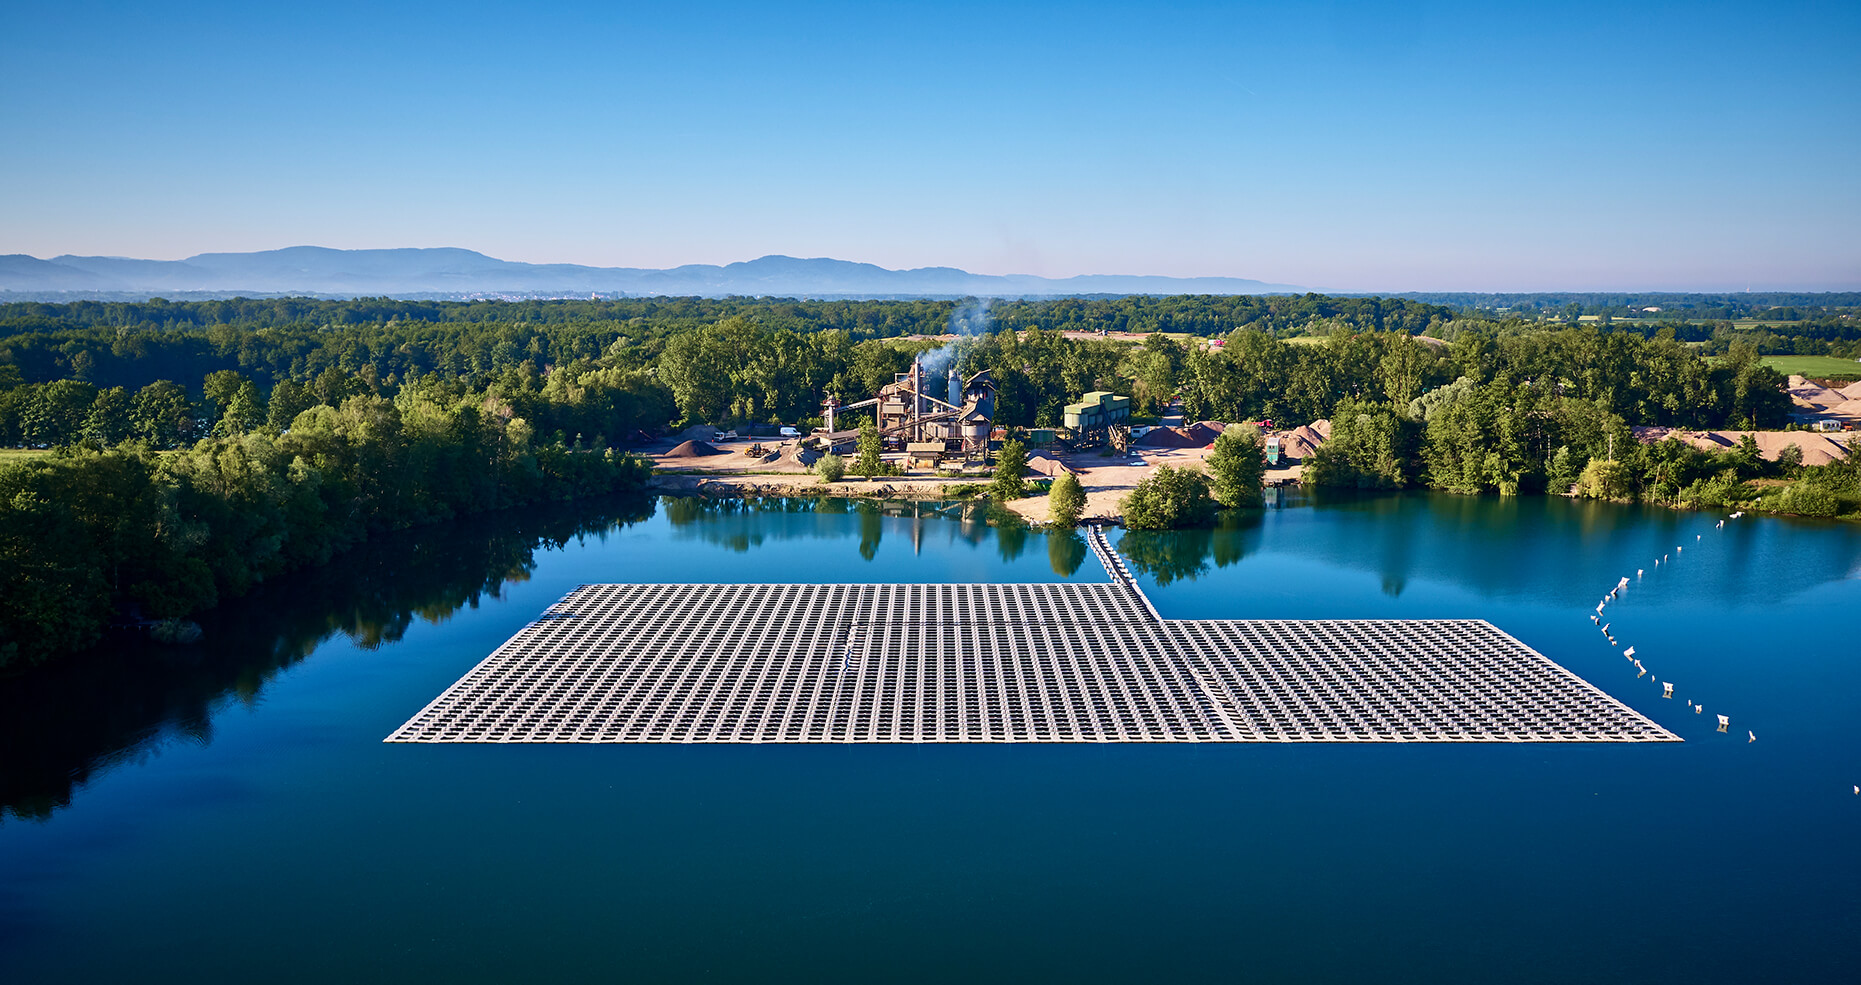 Floating PV power plant with 750 kW